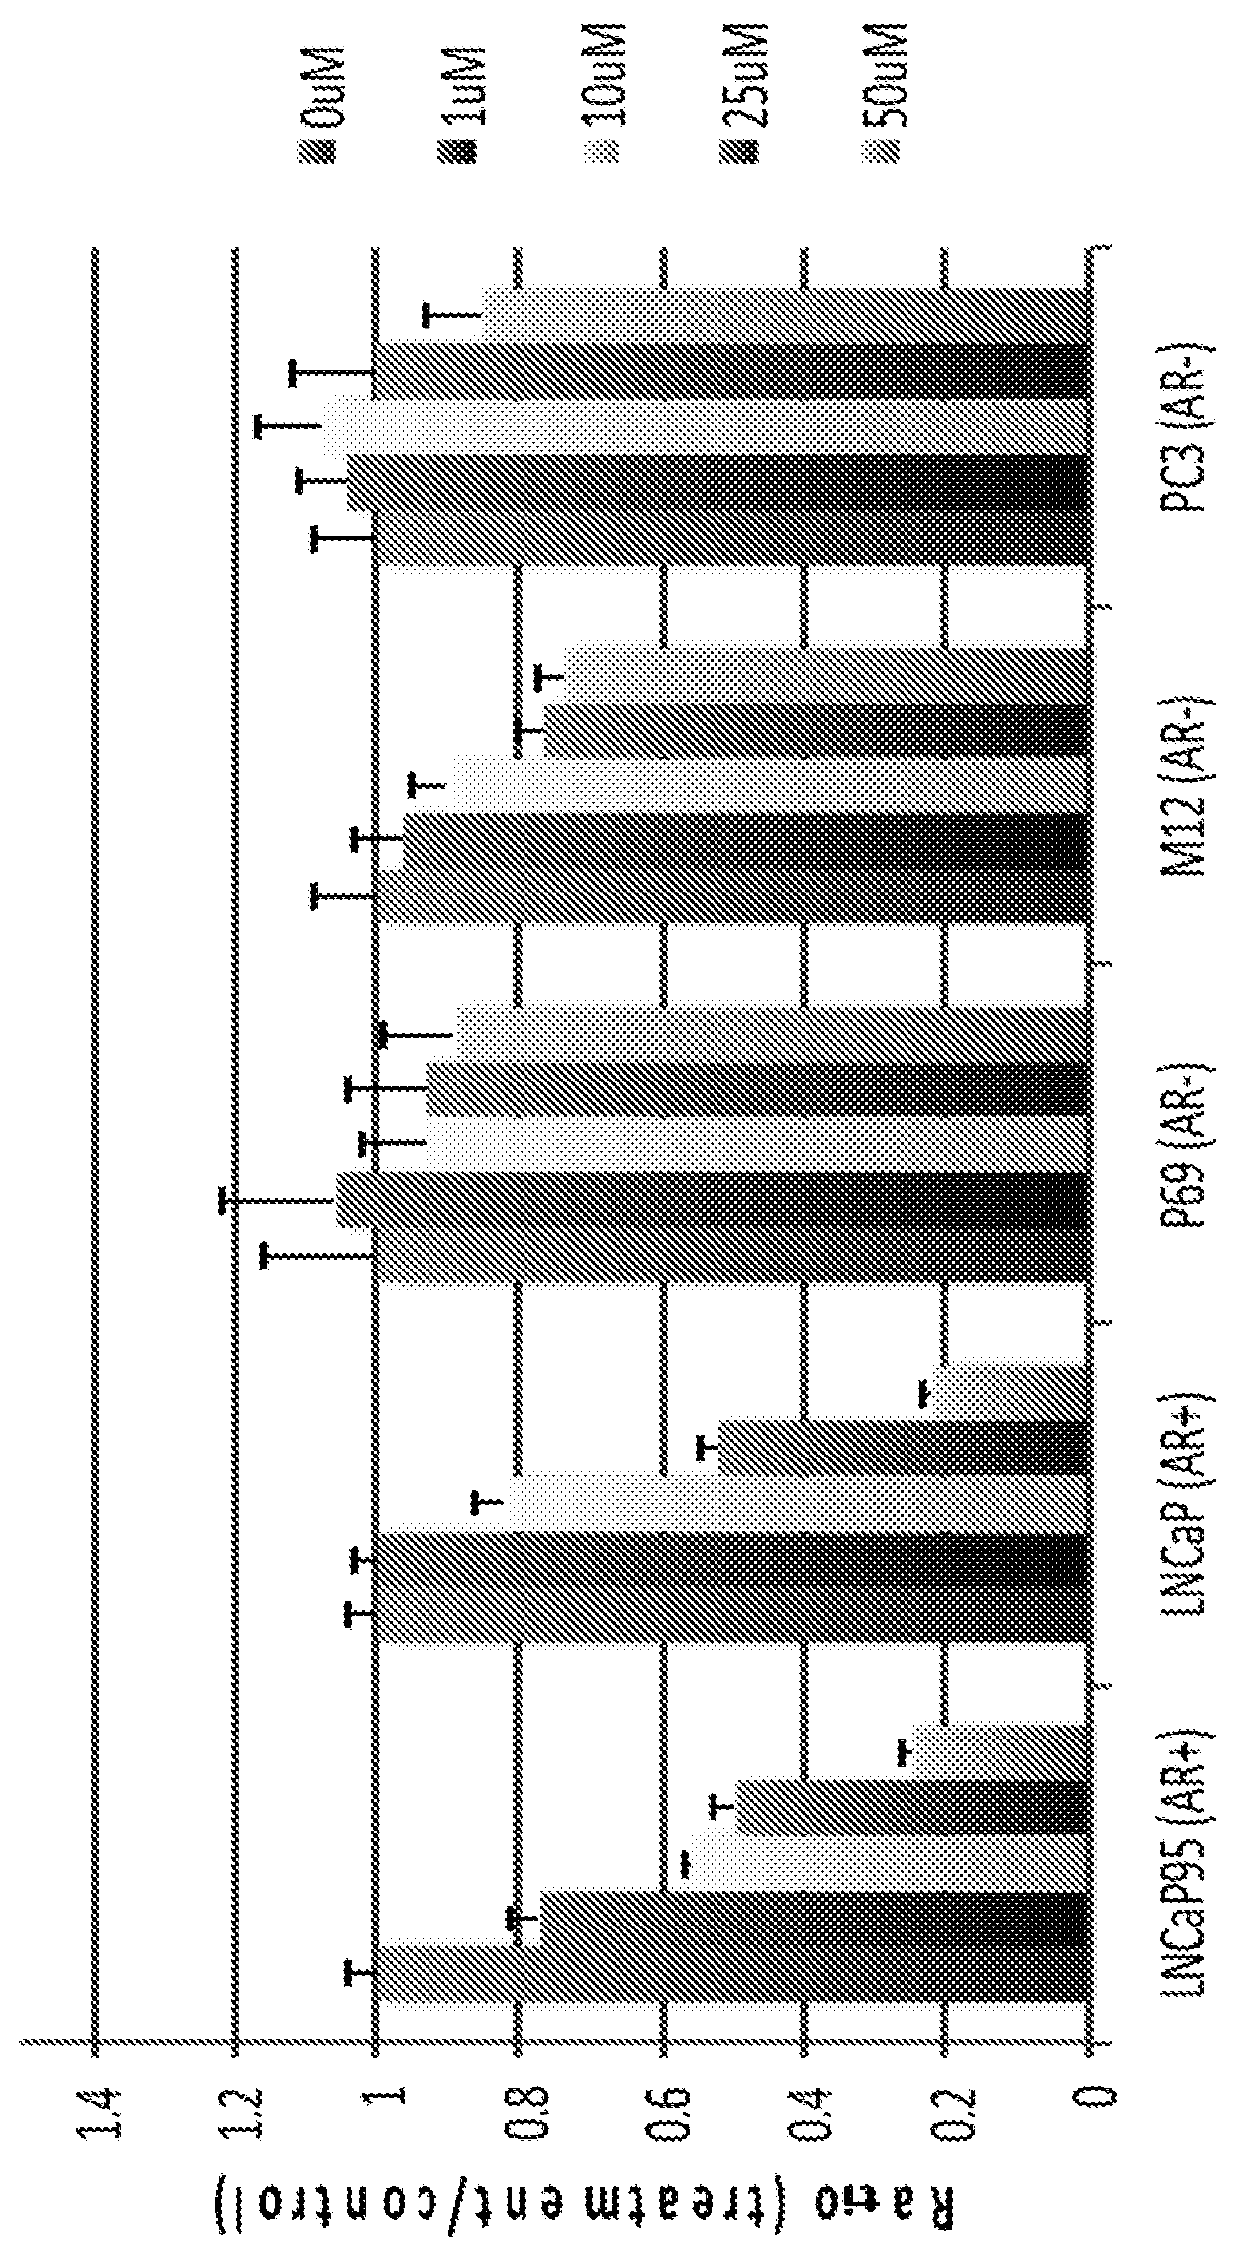 Bumped kinase inhibitor compositions and methods for treating cancer